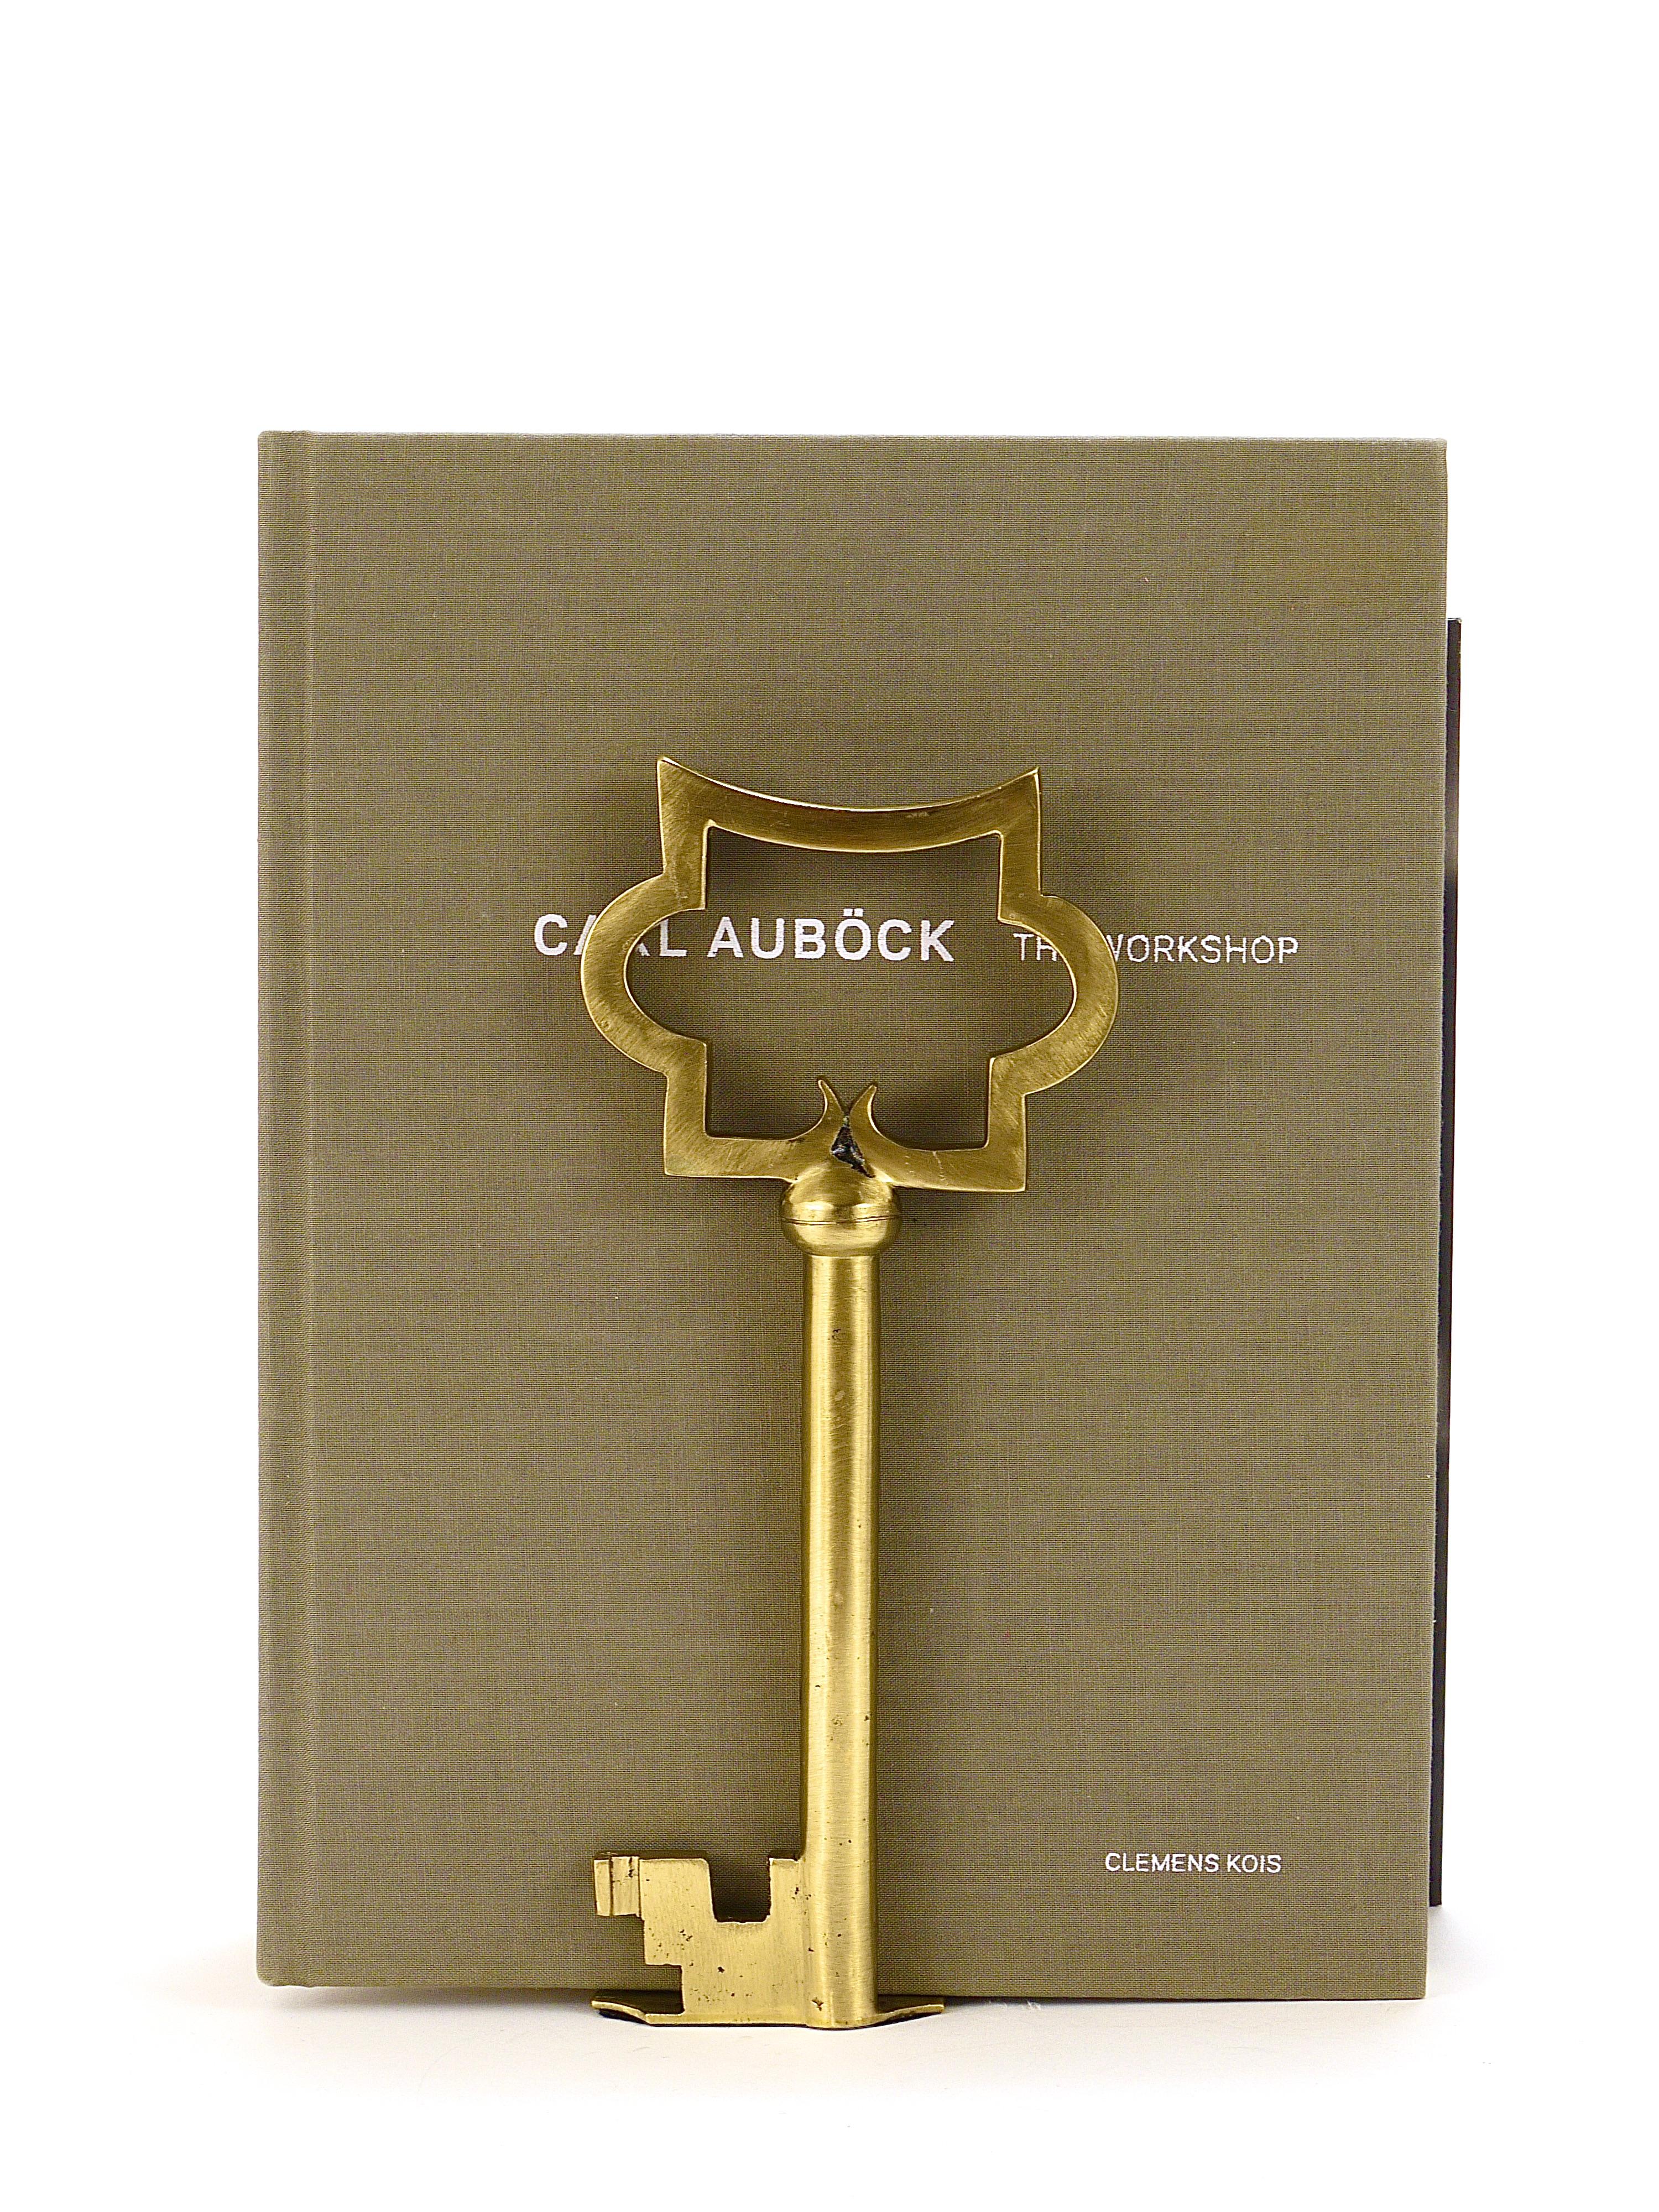 Sculptural Austrian Midcentury Brass Key Book Ends from the, 1950s For Sale 4